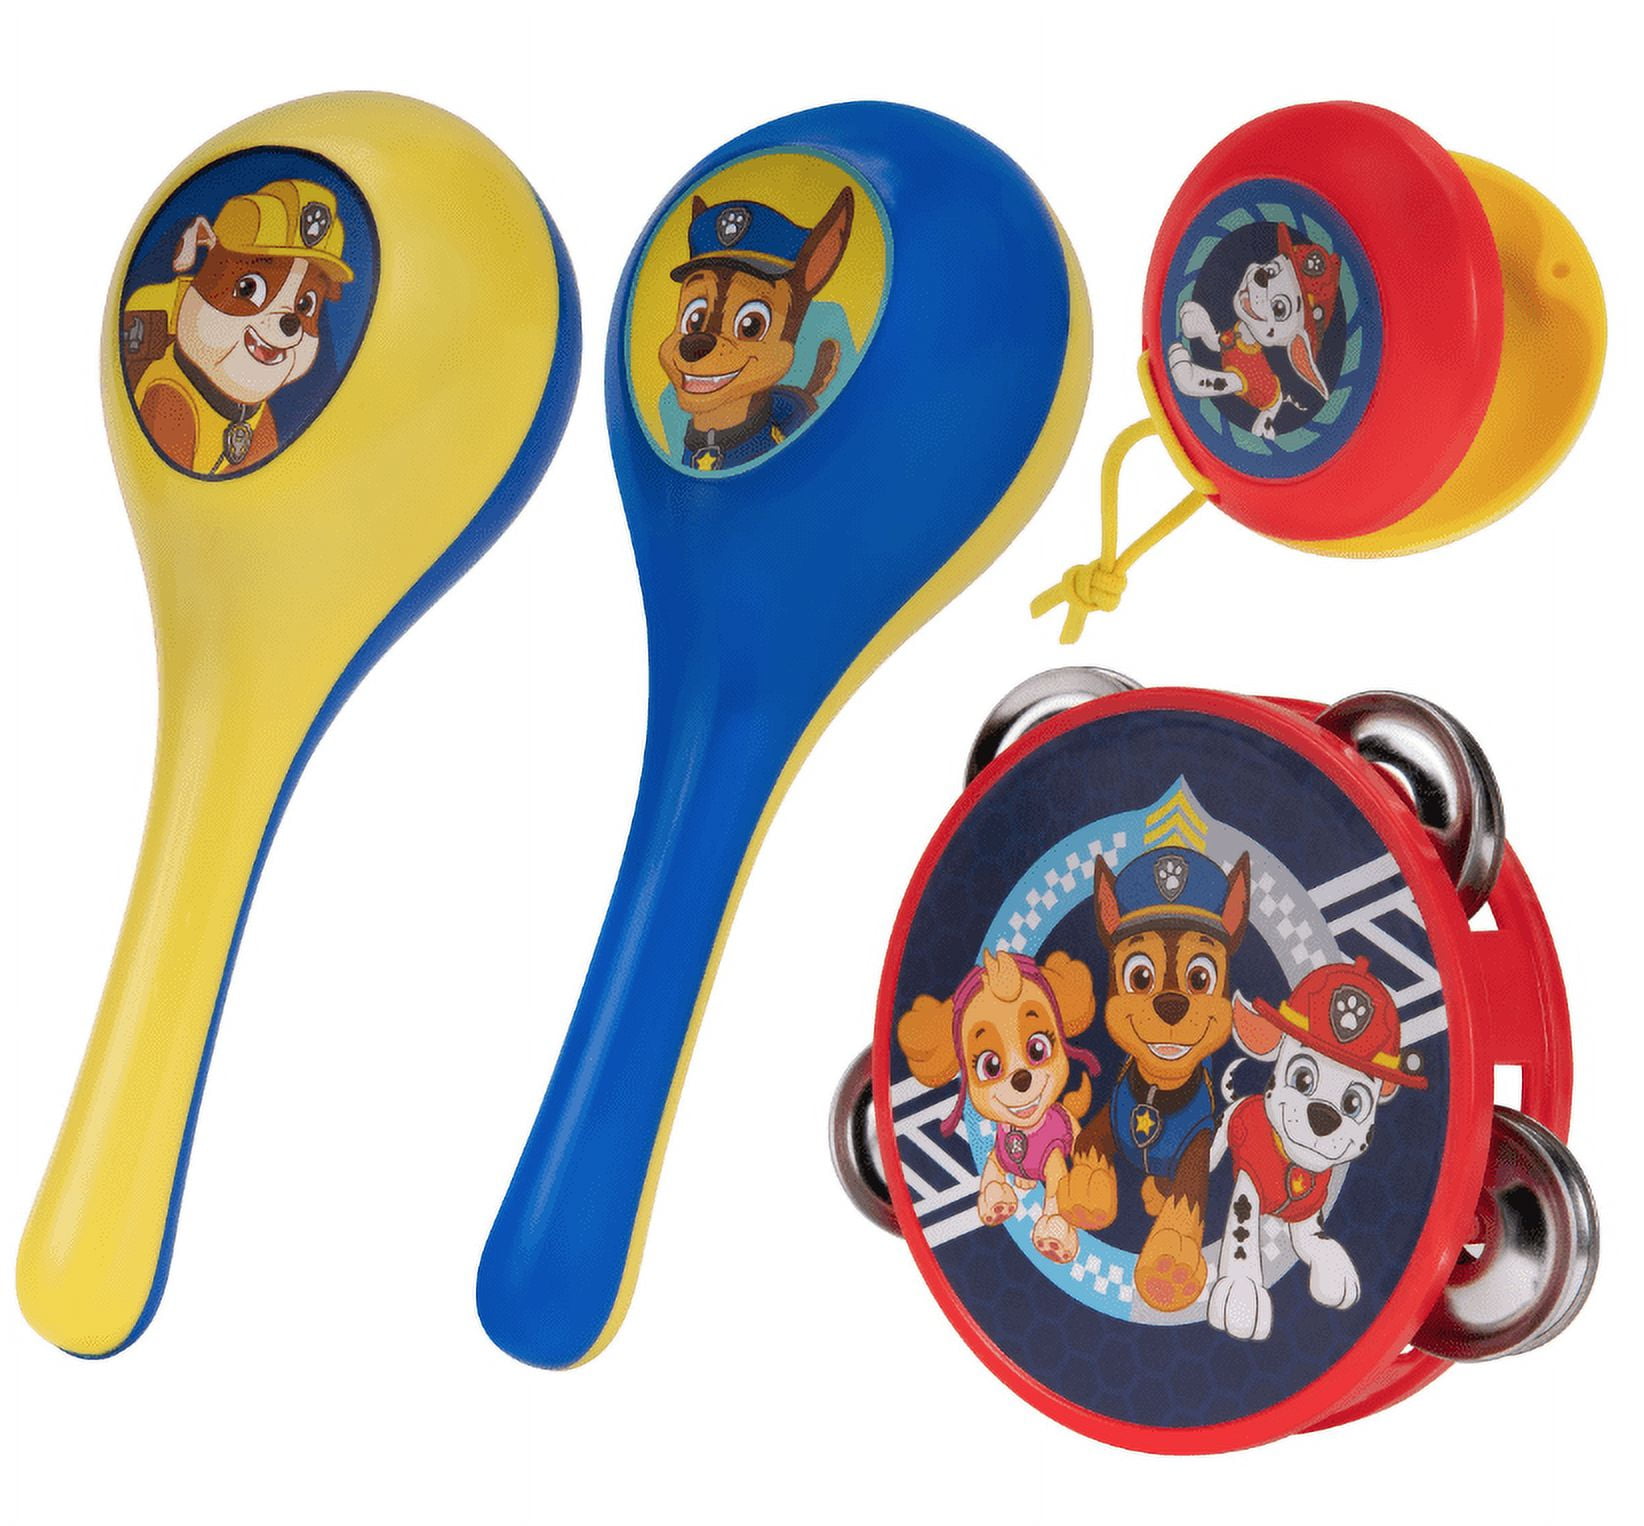 Nickelodeon First Act Play Paw Patrol 4 Piece Musical Band Set